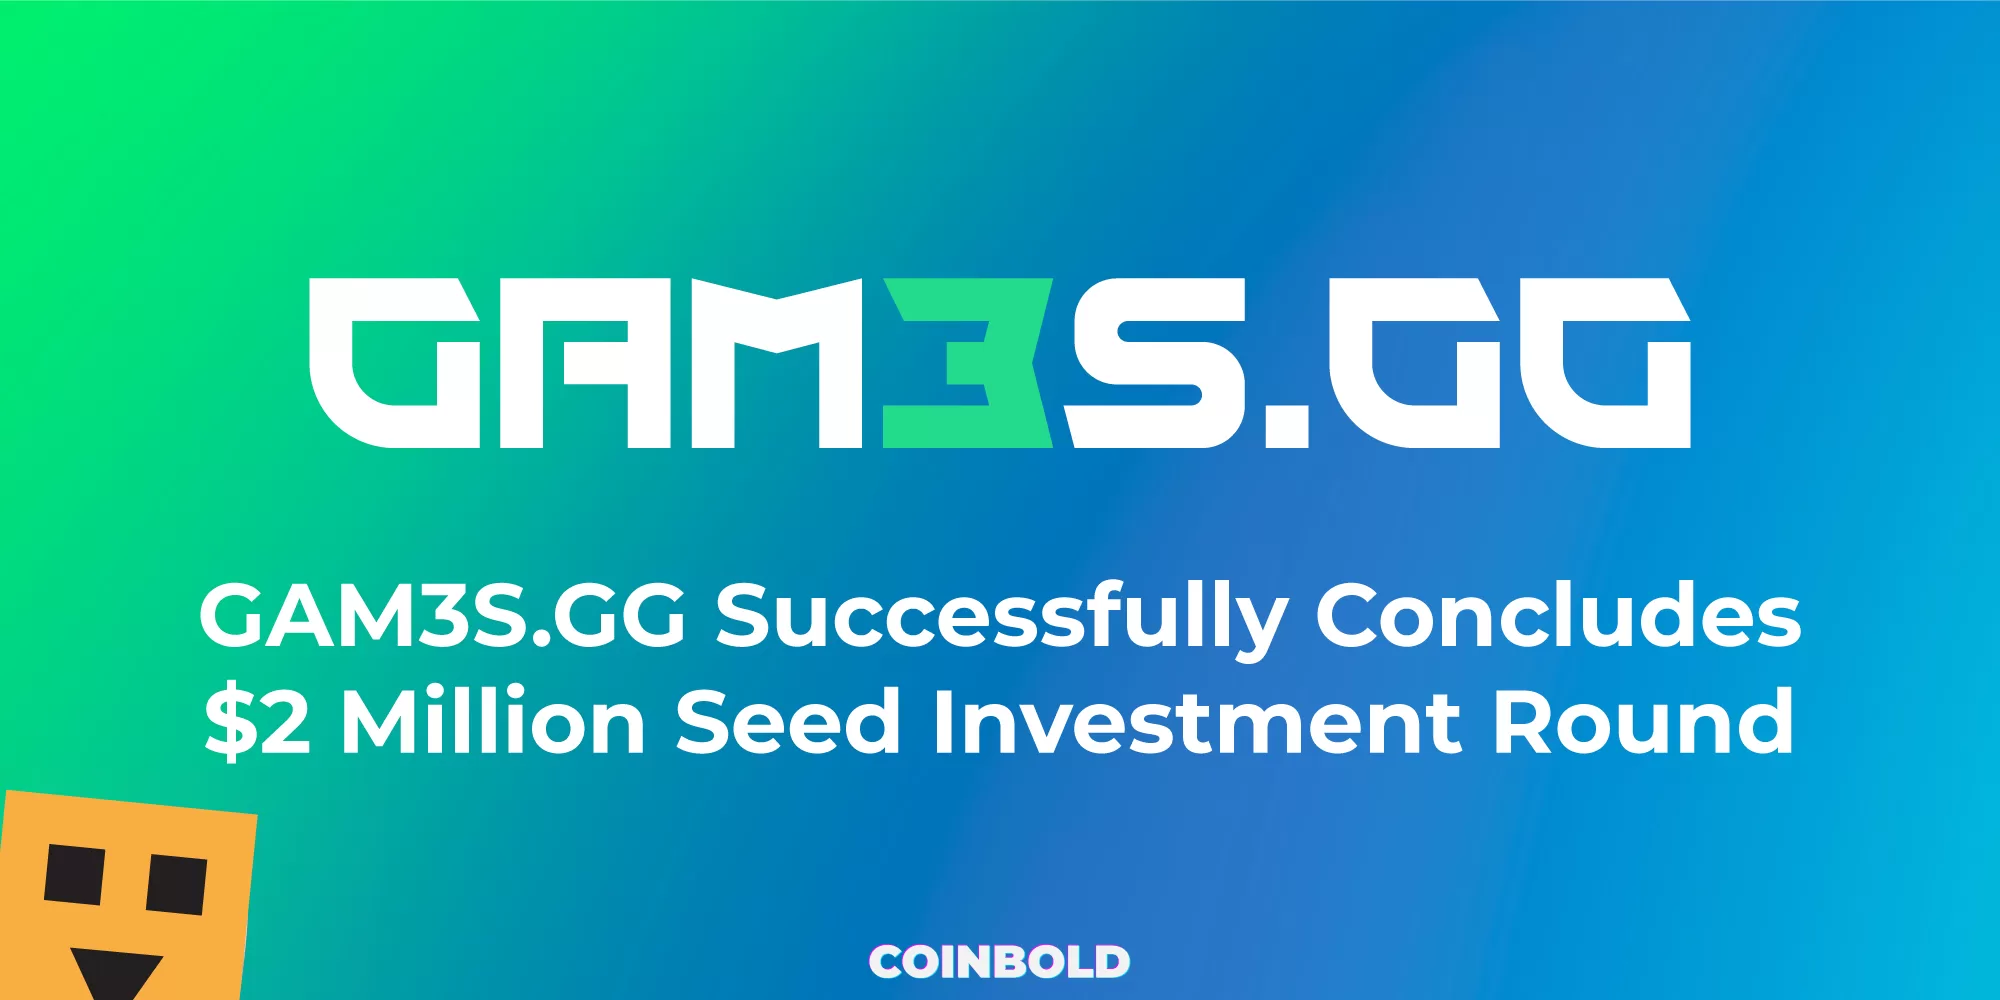 GAM3S.GG Successfully Concludes $2 Million Seed Investment Round